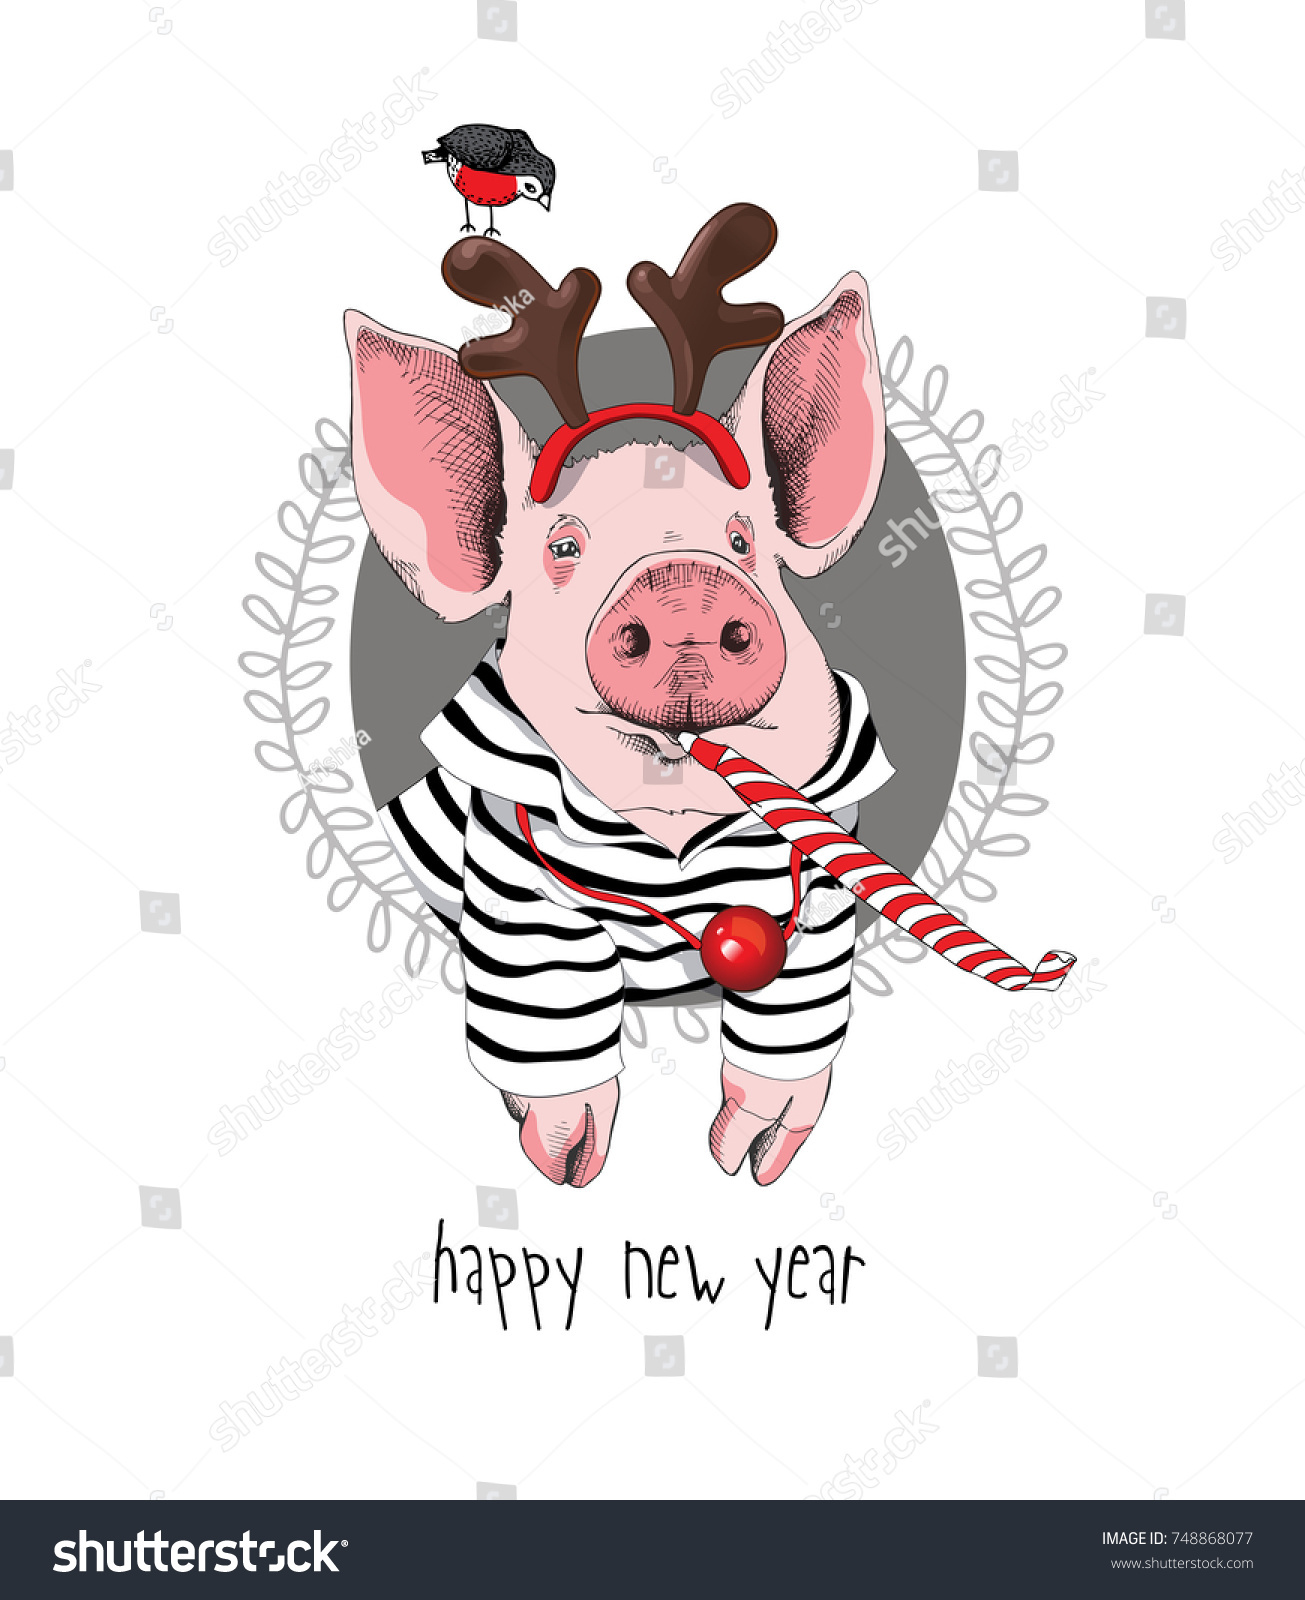 Download Christmas Card Portrait Pink Pig Striped Stock Vector ...